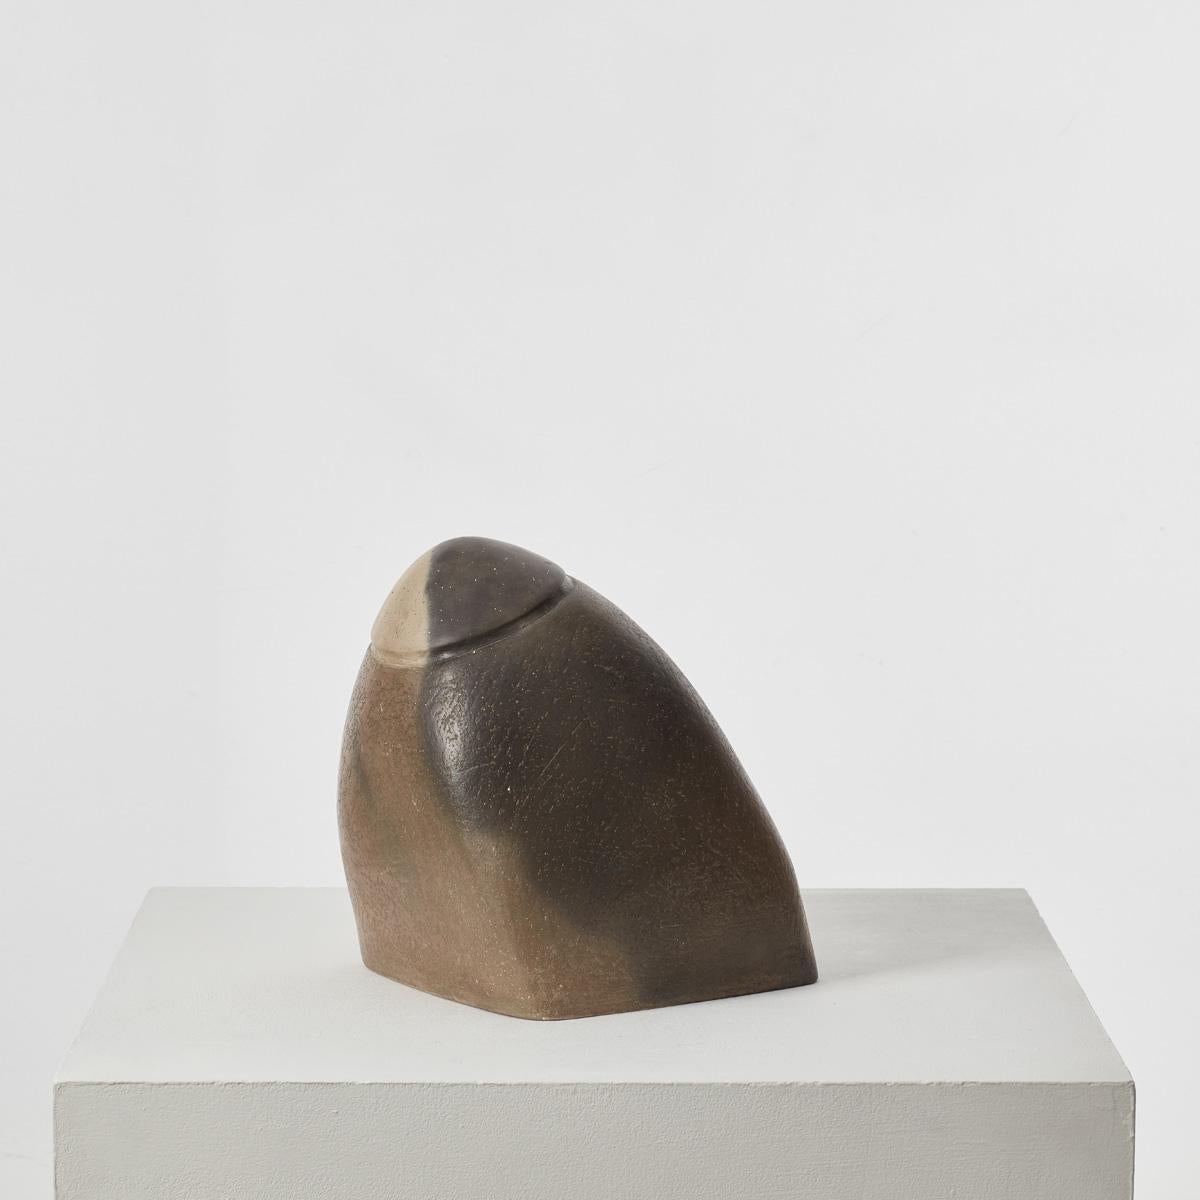 A large, biomorphic plaster sculpture with a burnished finish that sits as a solid piece with a dynamic slanted axis. It was previously owned by Sir Terence Conran (1931 – 2020). Conran, an inimitable design pioneer and businessman, “did more than